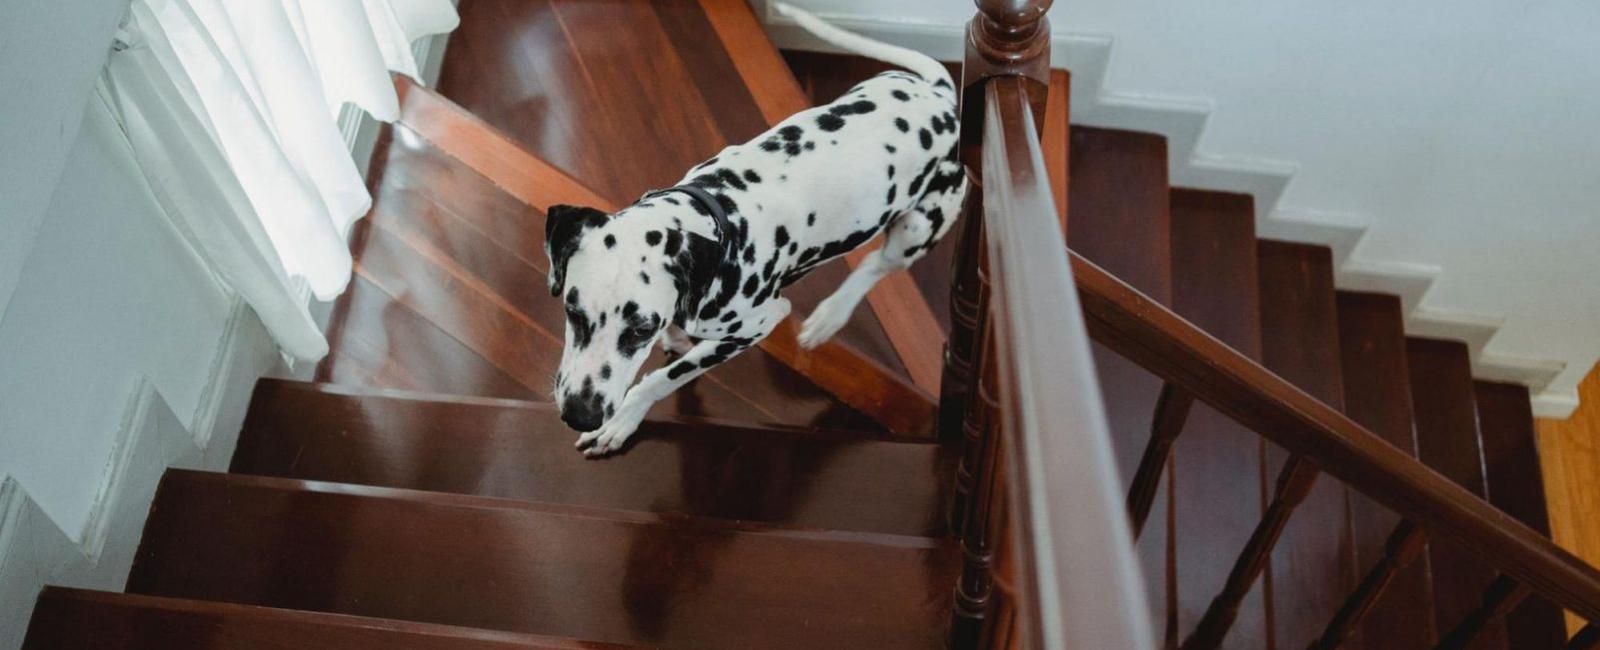 Easily Teach Your Scared Dog to Go down the Stairs with This Effective Method